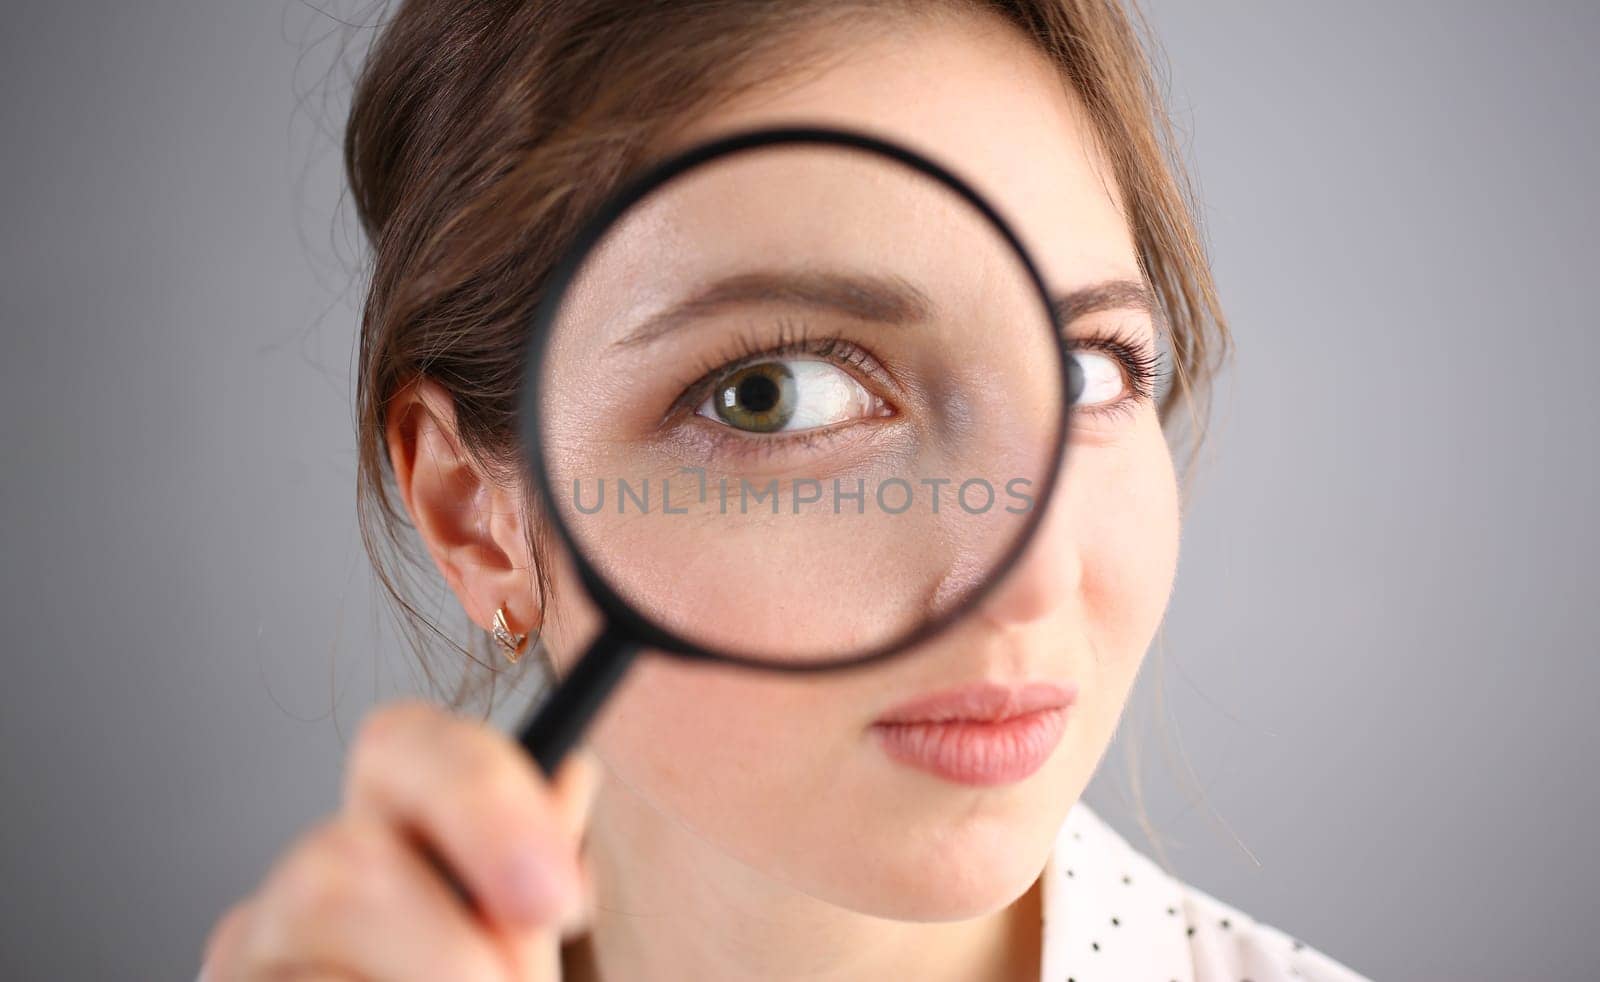 Inquisitive young woman looking through magnifying glass by kuprevich